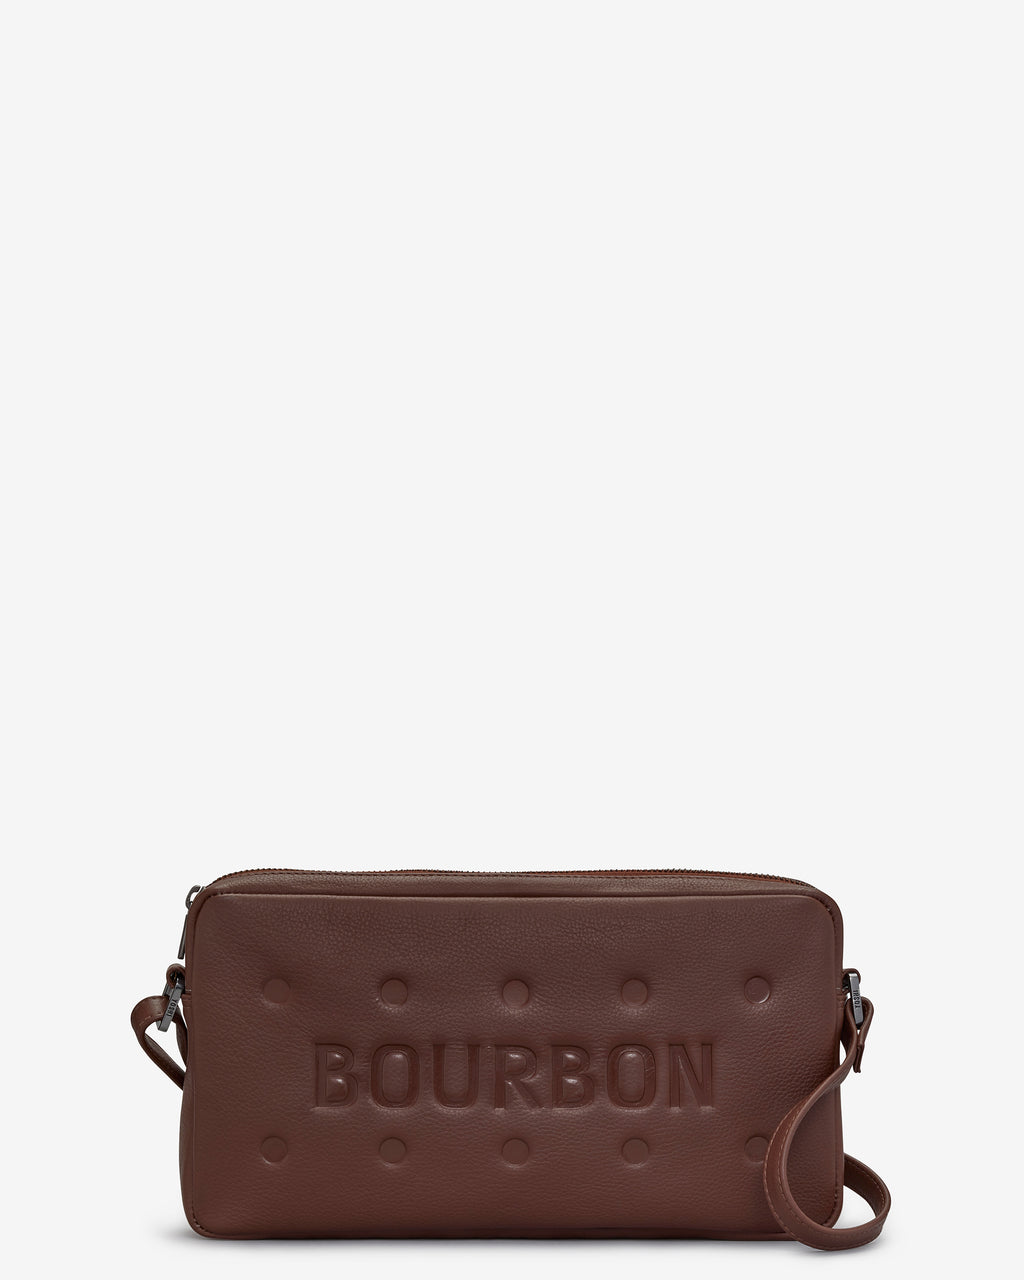 Bourbon Biscuit Leather Cross Body Bag